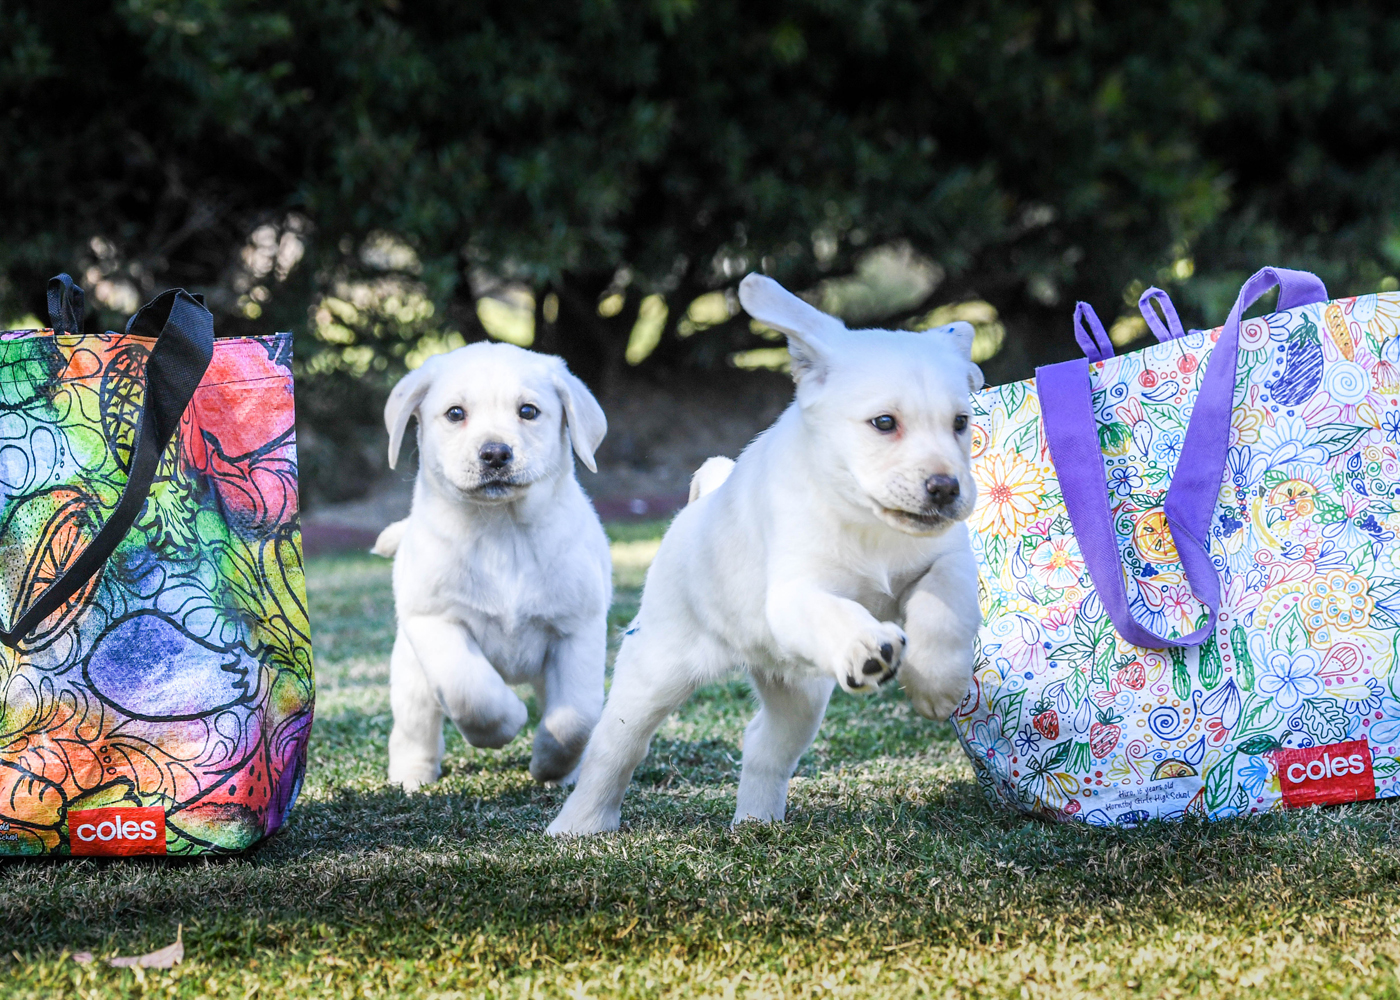 Guide Dog puppies with the bags which have helped raise funds for their training